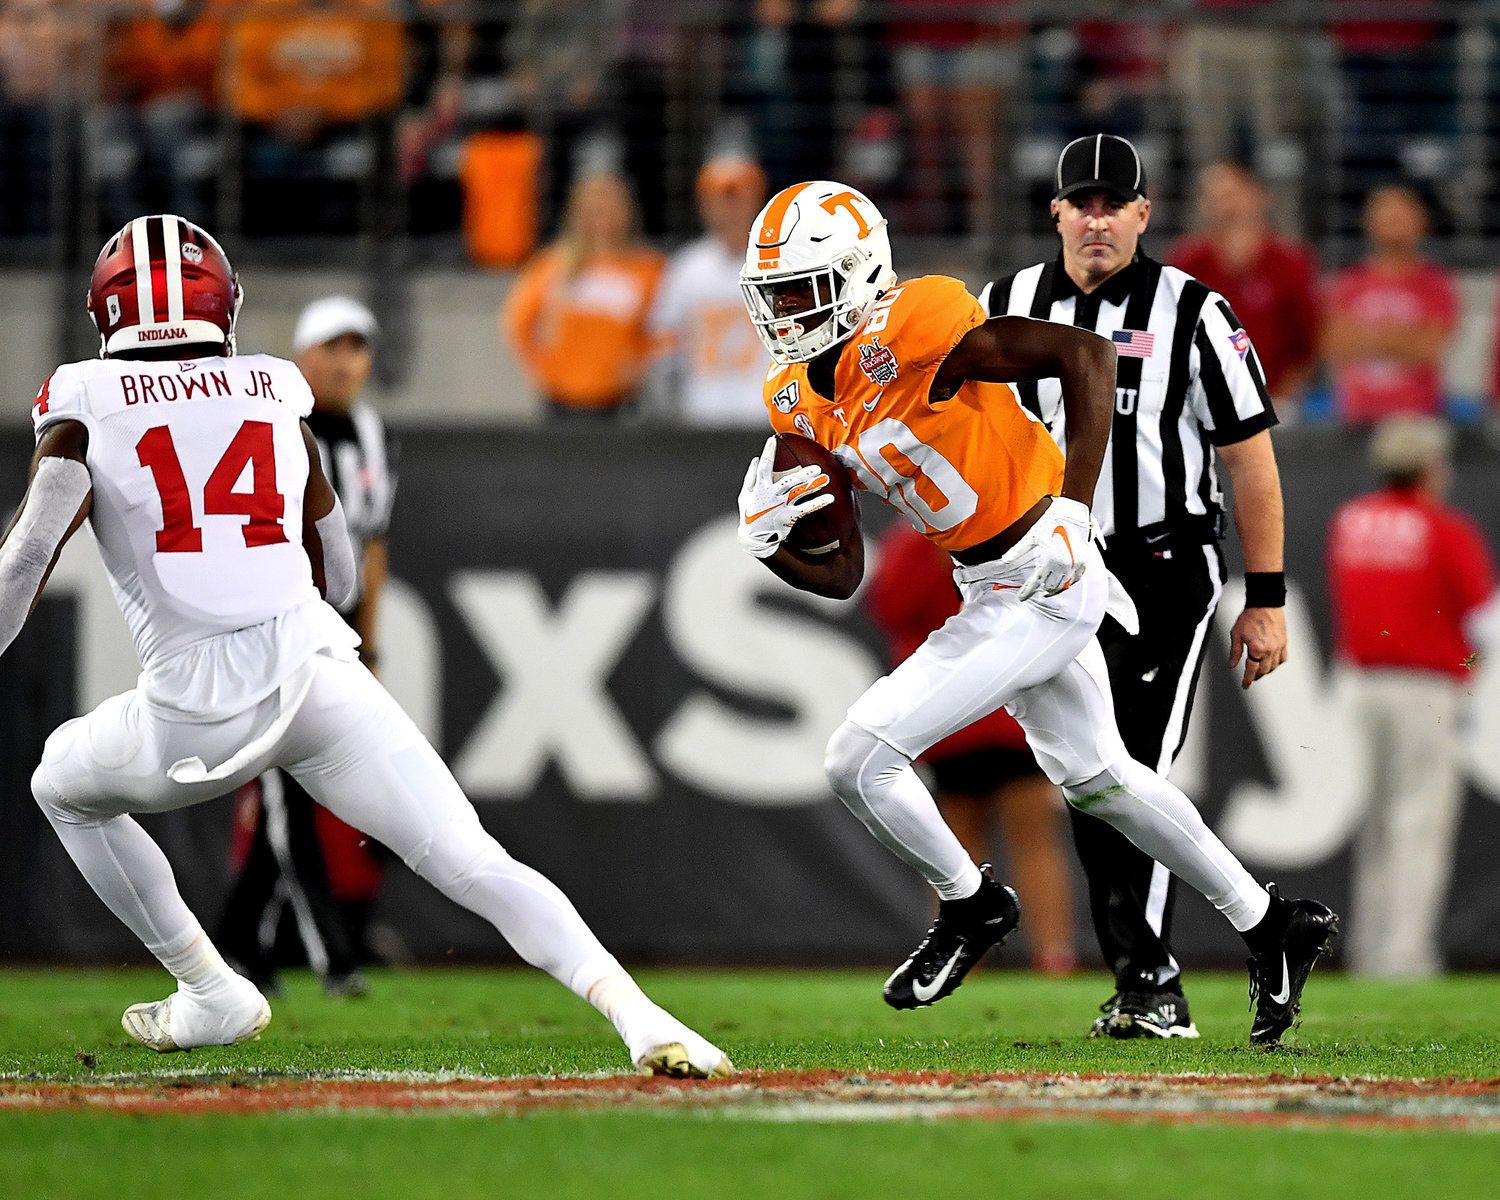 Tennessee Volunteers wide receiver Ramel Keyton (80) adds yards after the catch during the first half of the Gator Bowl NCAA football game against the Indiana Hoosiers Thursday, January 2, 2020, at TIAA Bank Field in Jacksonville, Fla.